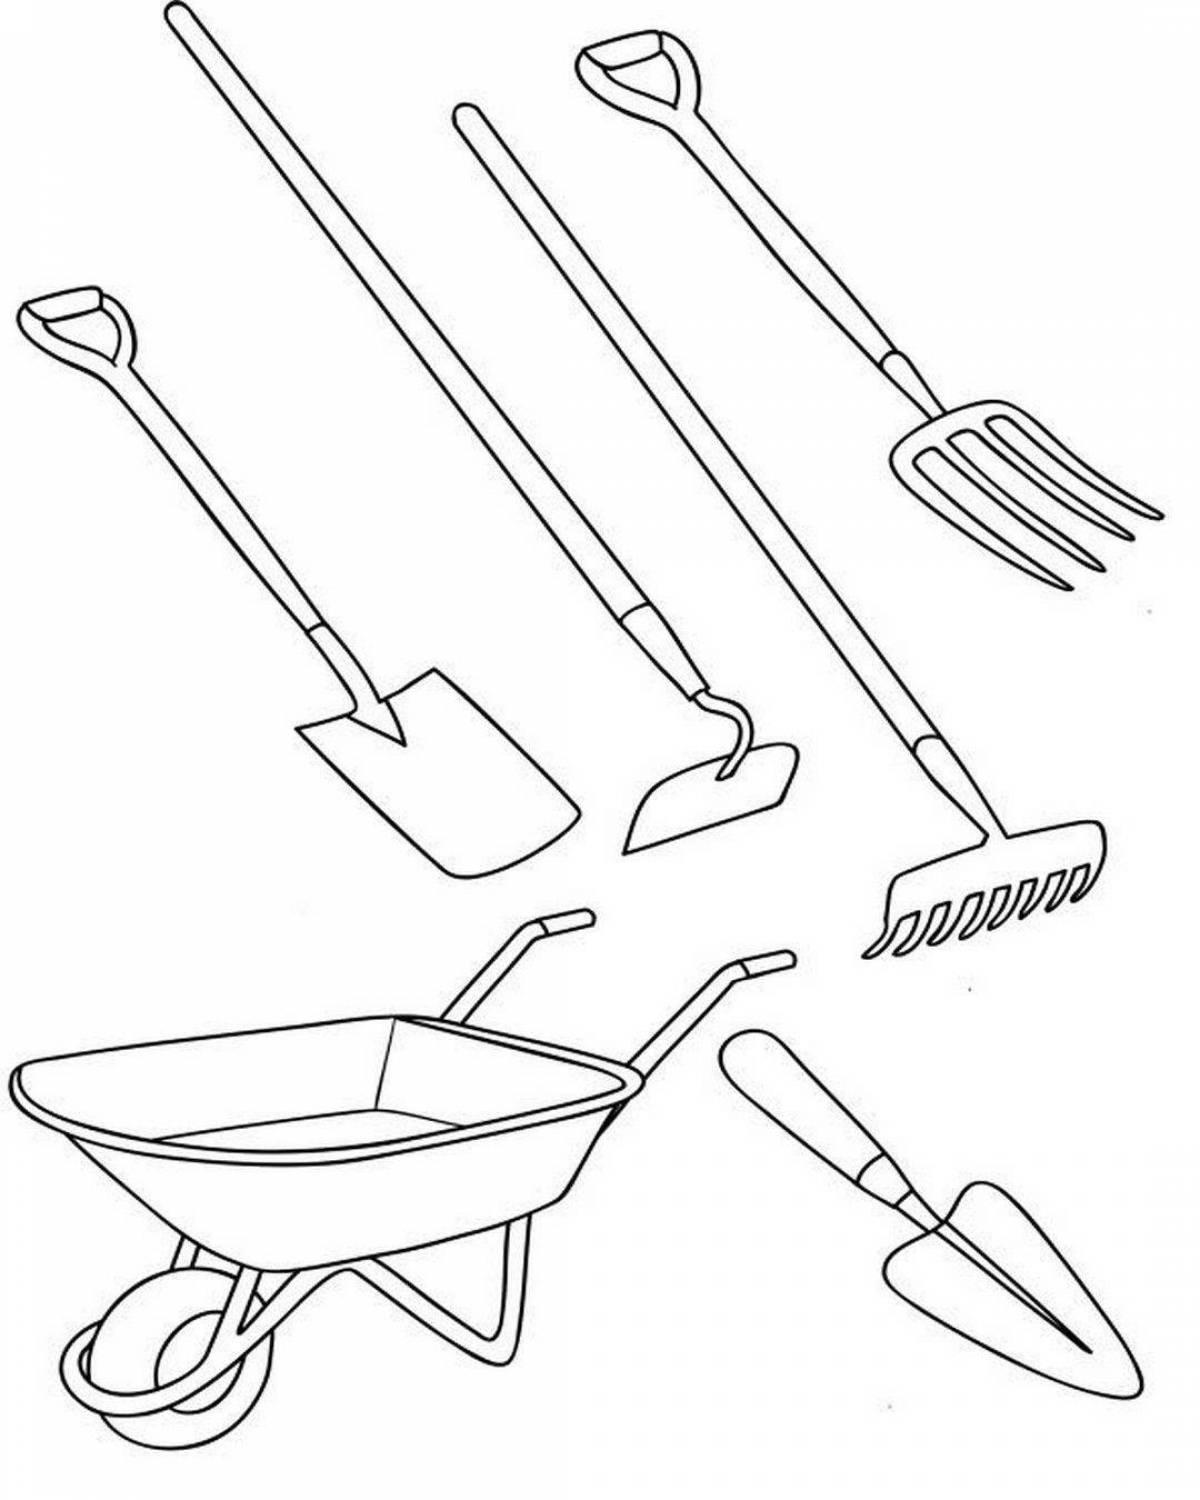 Fun coloring pages for preschoolers